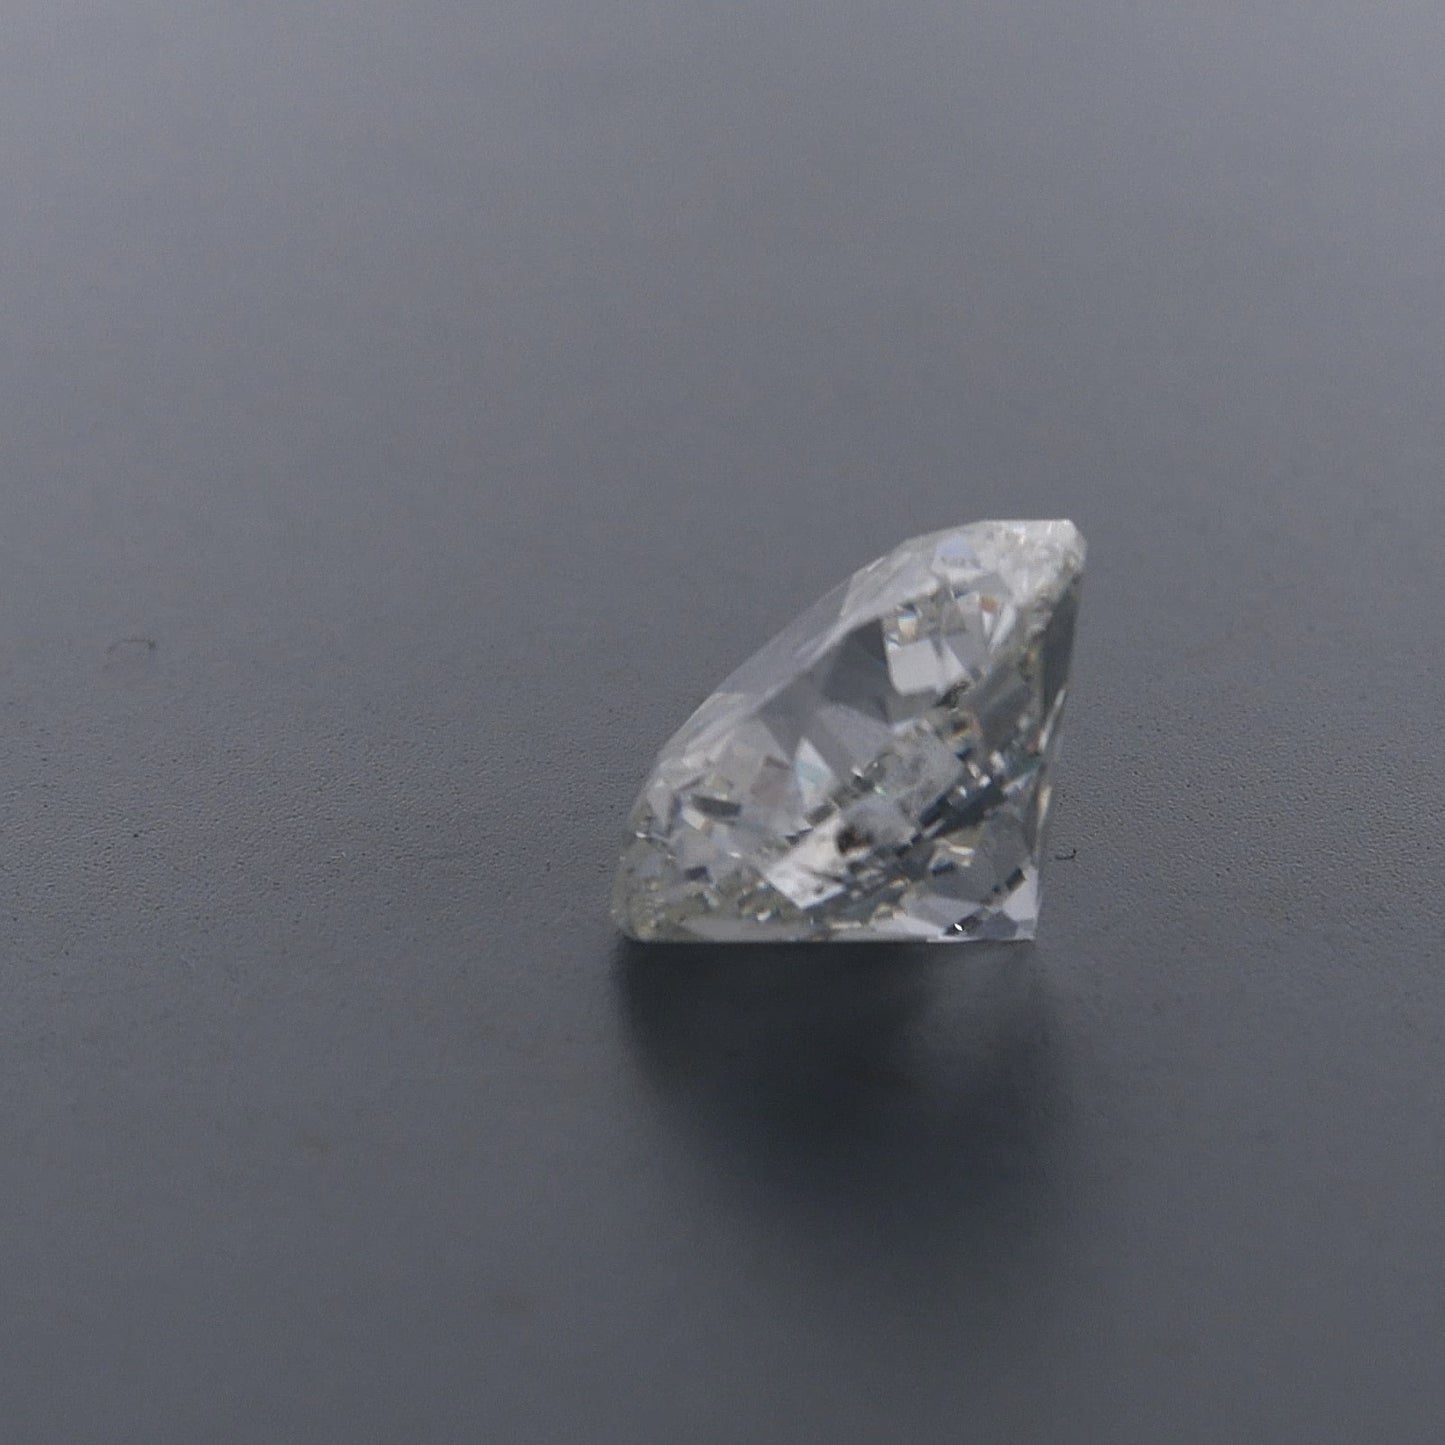 Round Brilliant 5.01ct HSI2 Diamond with GIA Certification